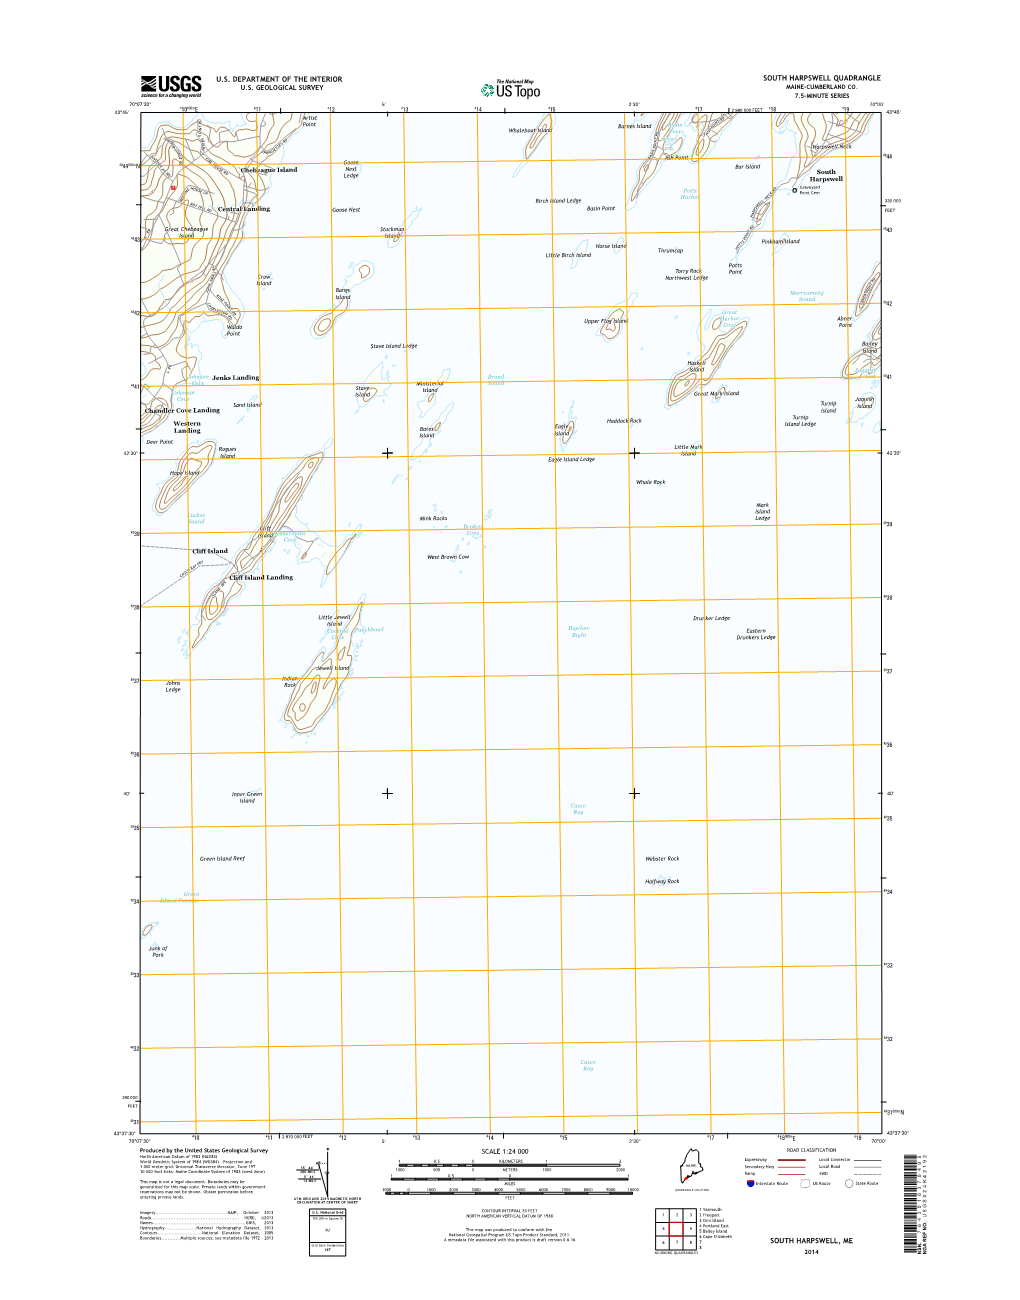 USGS 7.5-Minute Image Map for South Harpswell, Maine